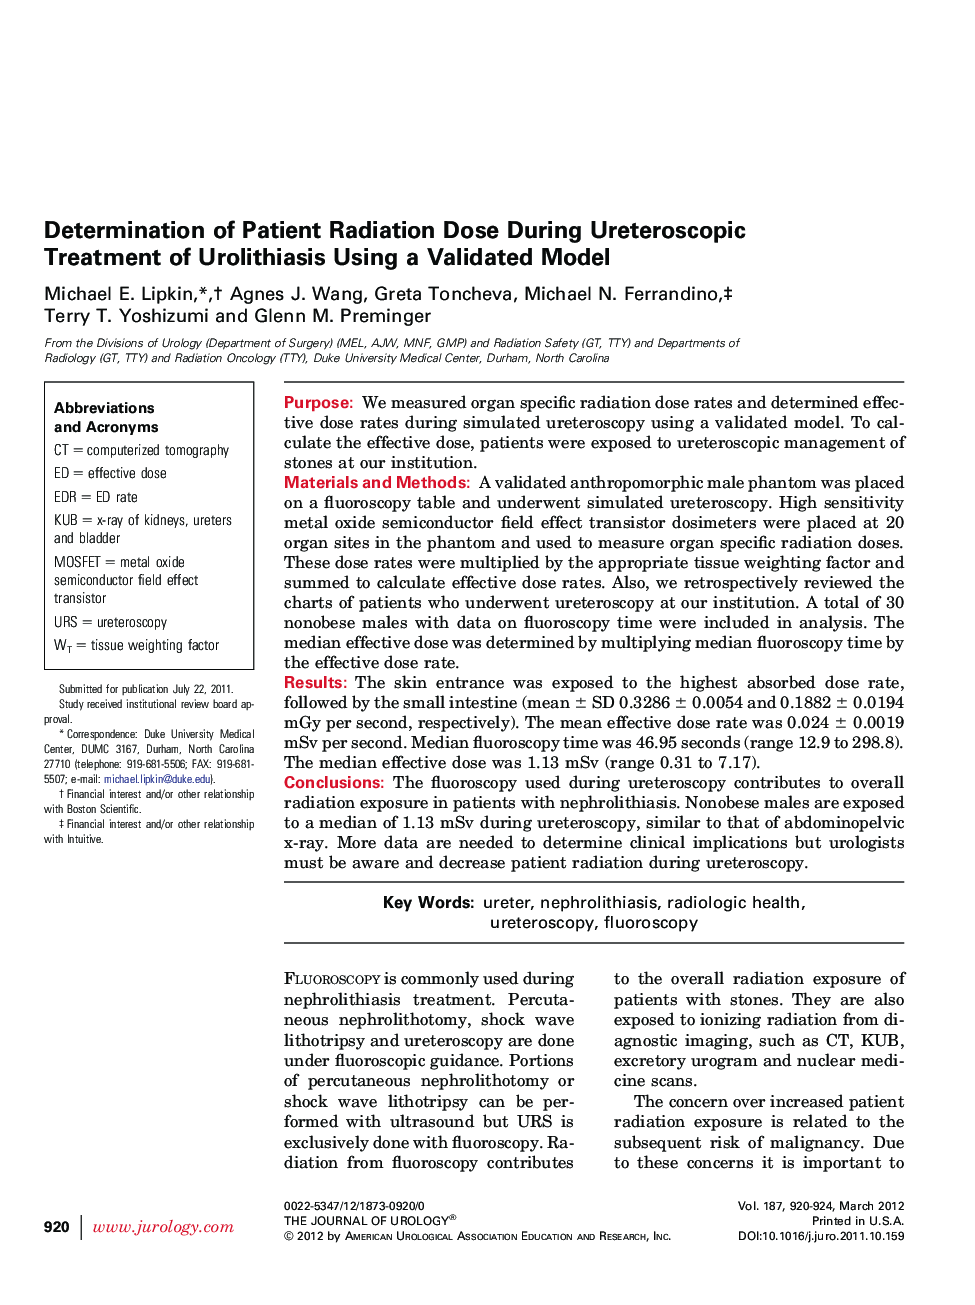 Determination of Patient Radiation Dose During Ureteroscopic Treatment of Urolithiasis Using a Validated Model